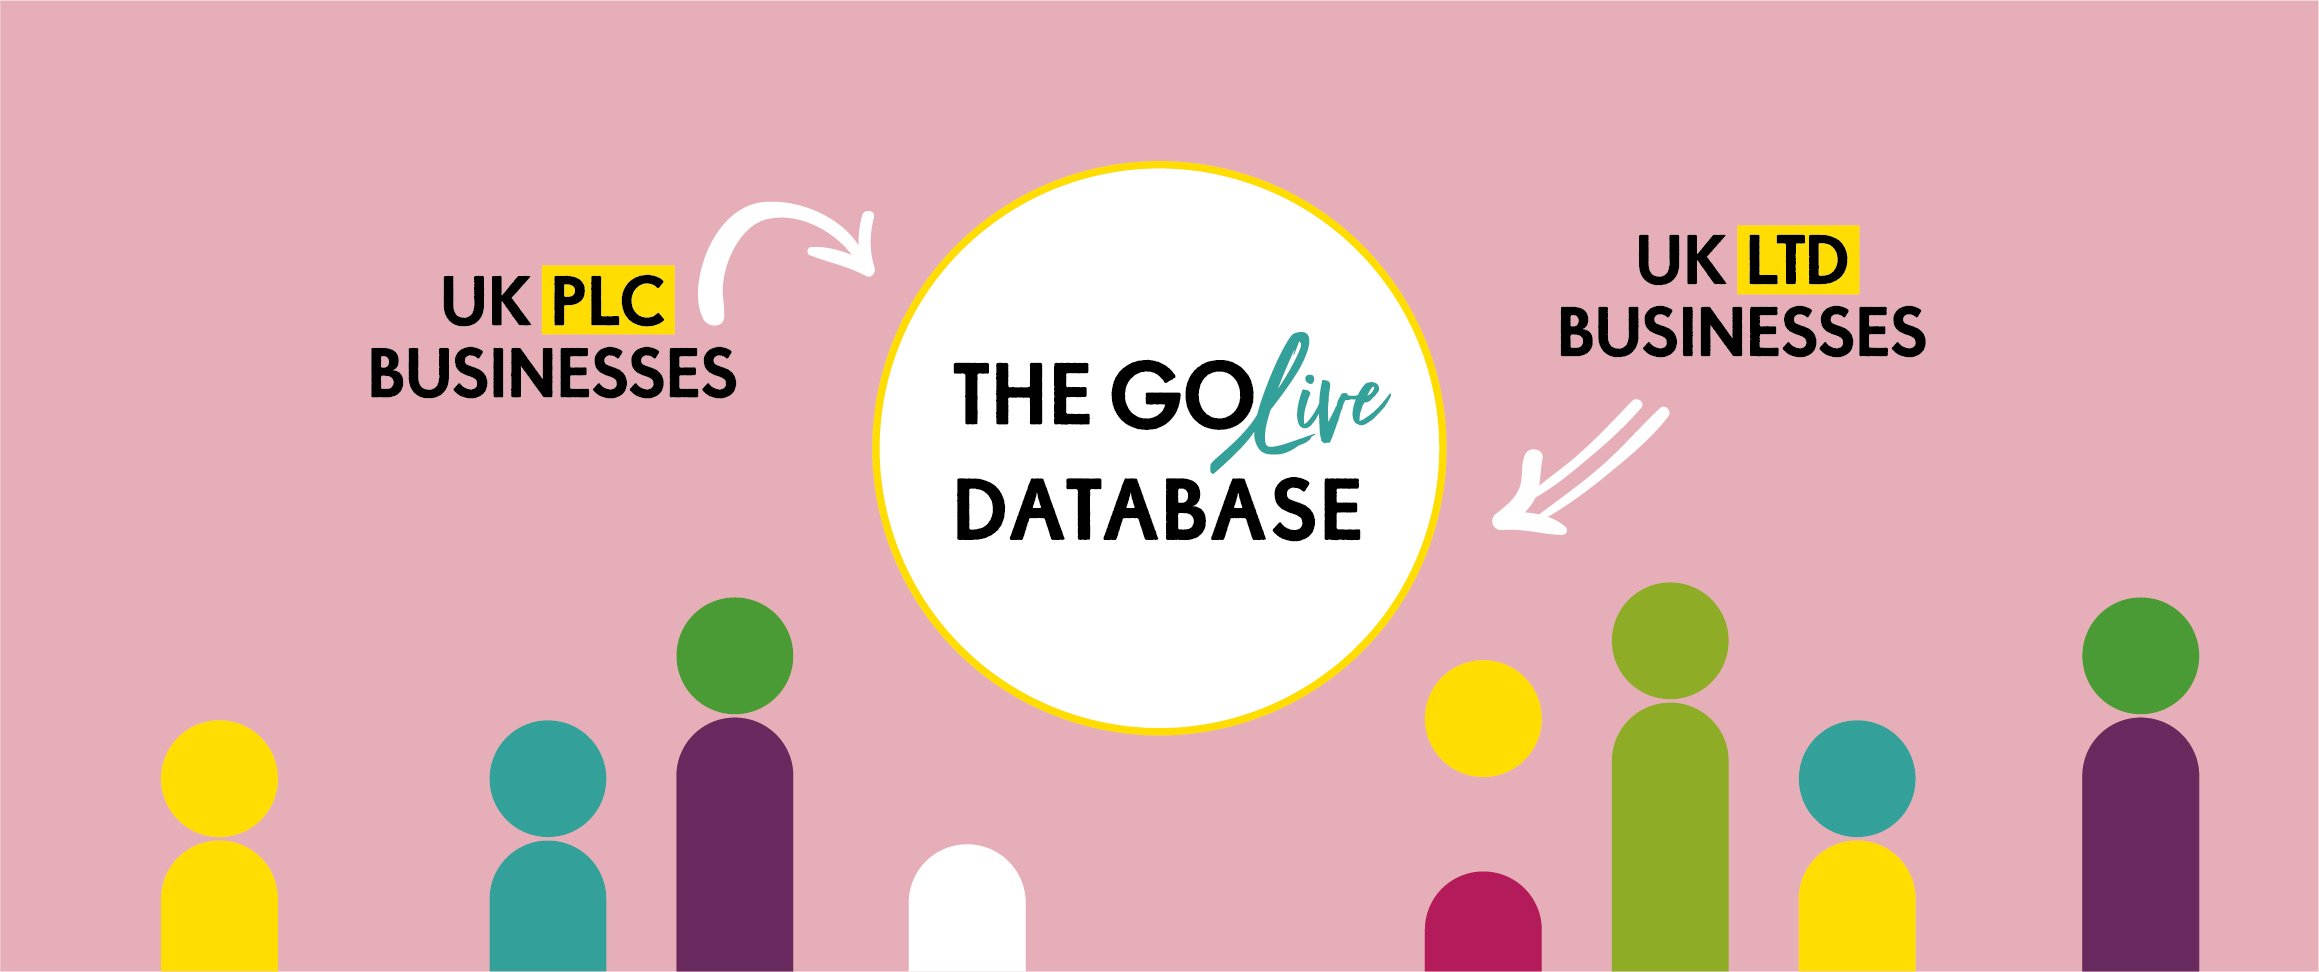 We think big to populate and update our Go Live database